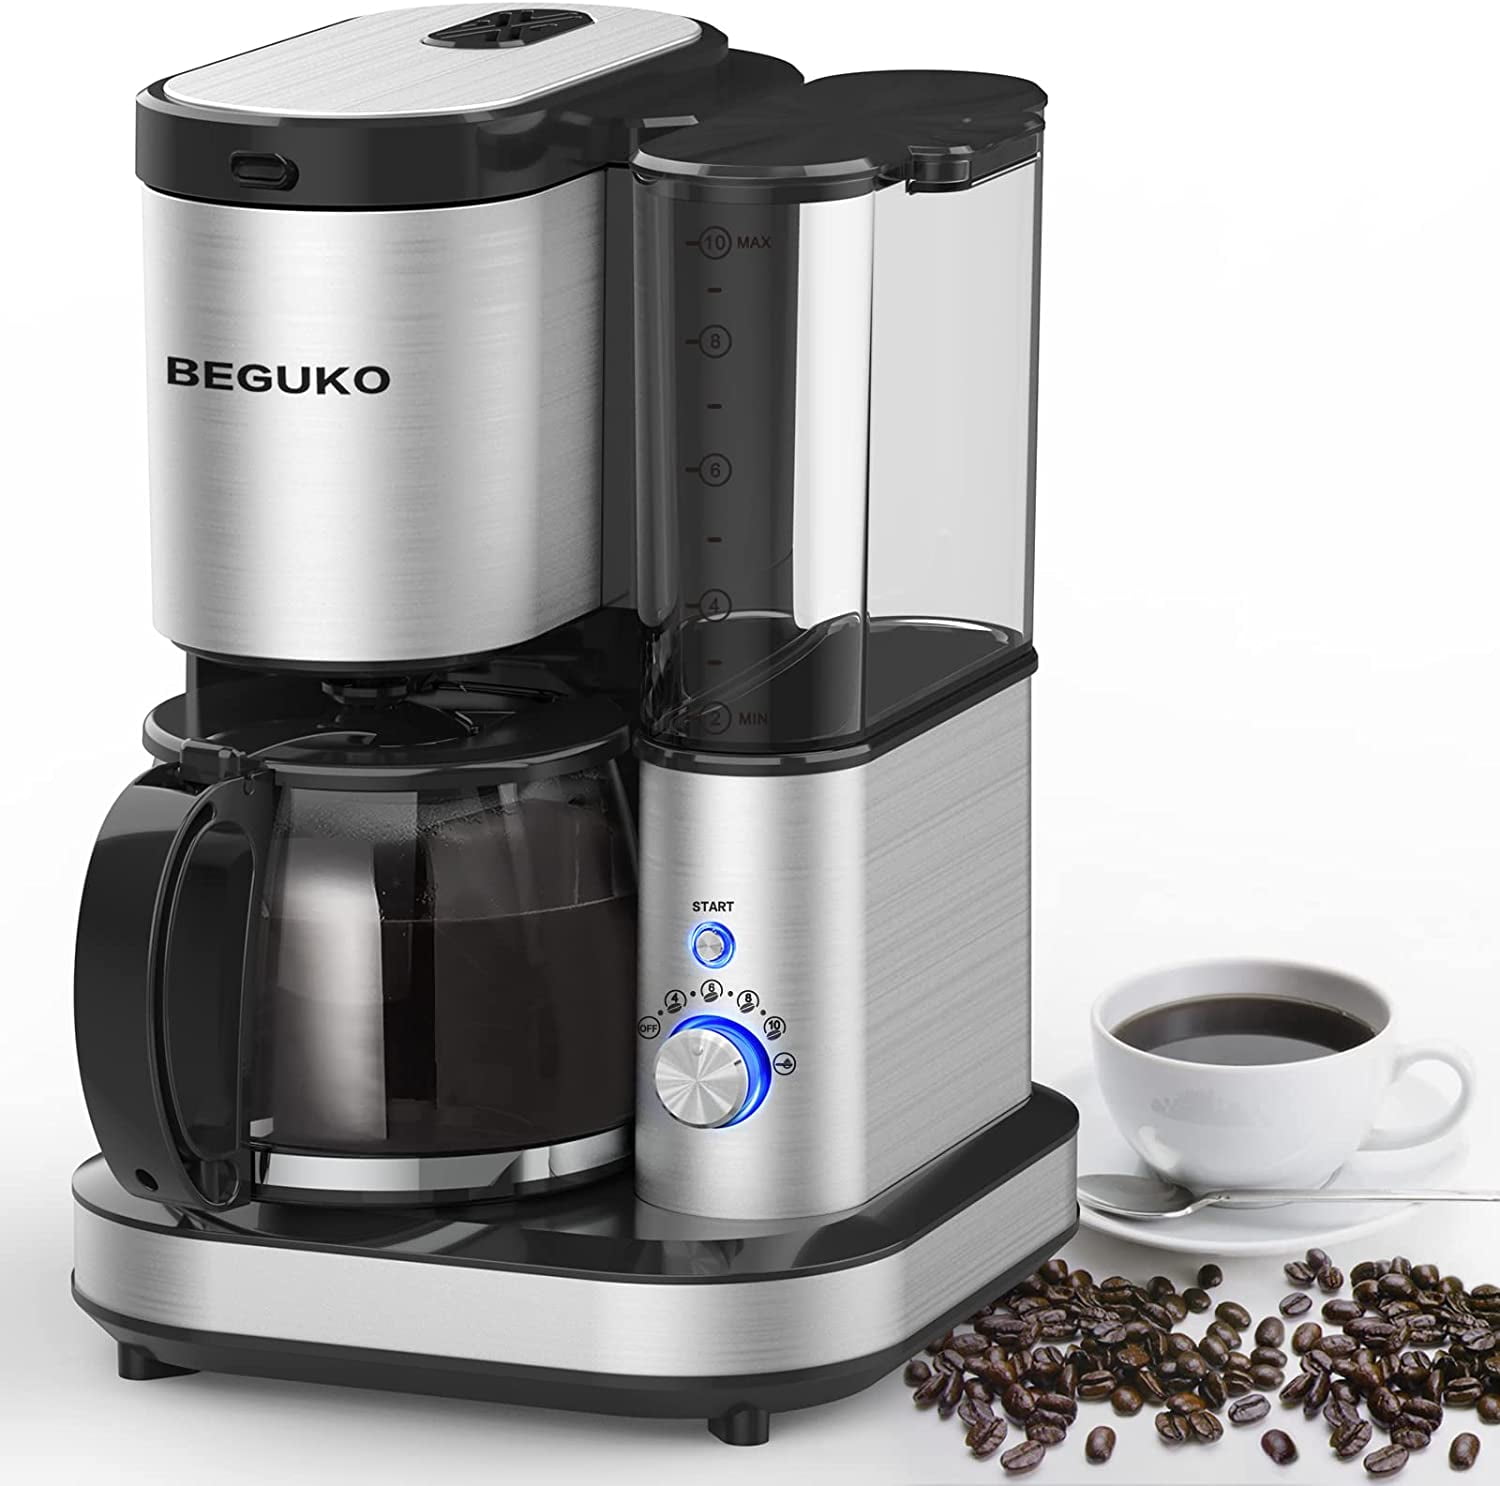 BEGUKO Coffee Maker with Grinder Built in 10 Cup Grind and Brew